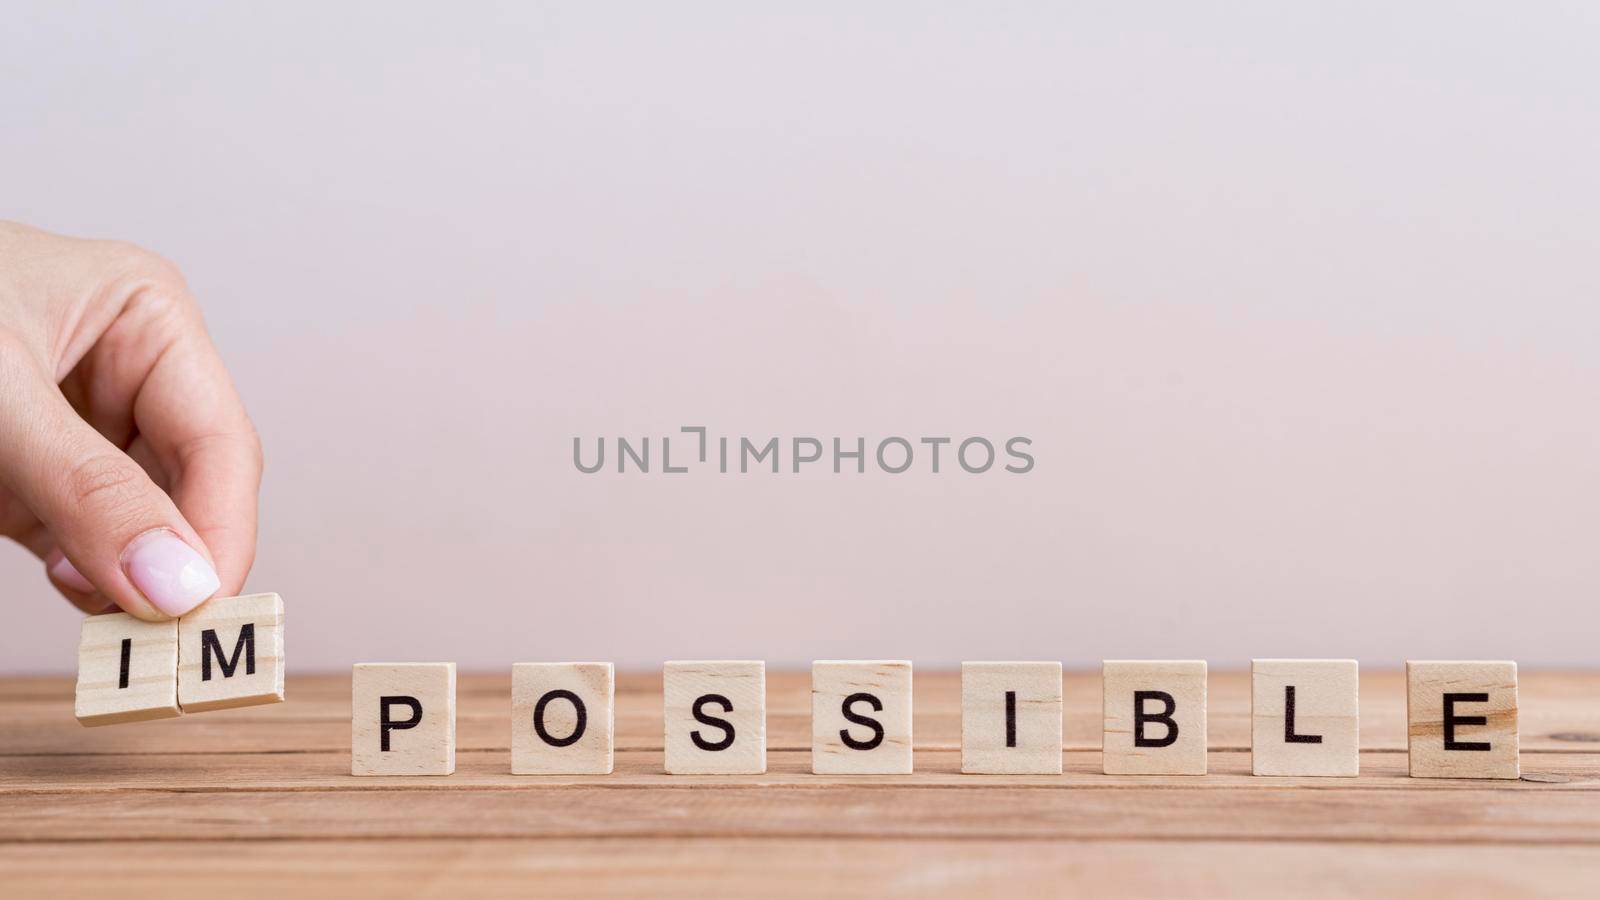 impossible text white cubes arrangement. High quality photo by Zahard